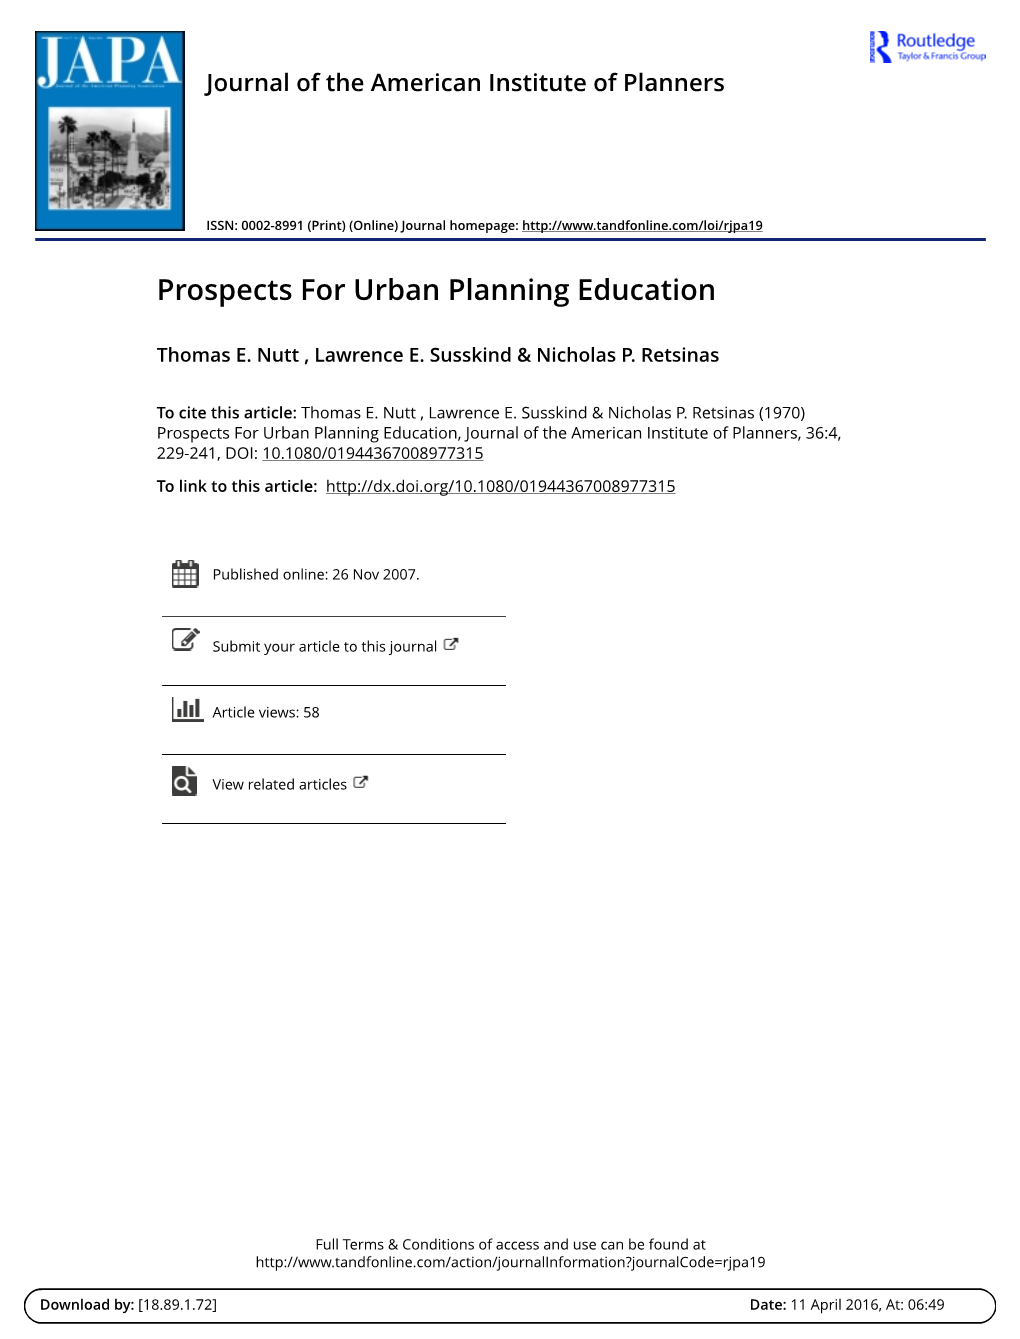 Prospects for Urban Planning Education